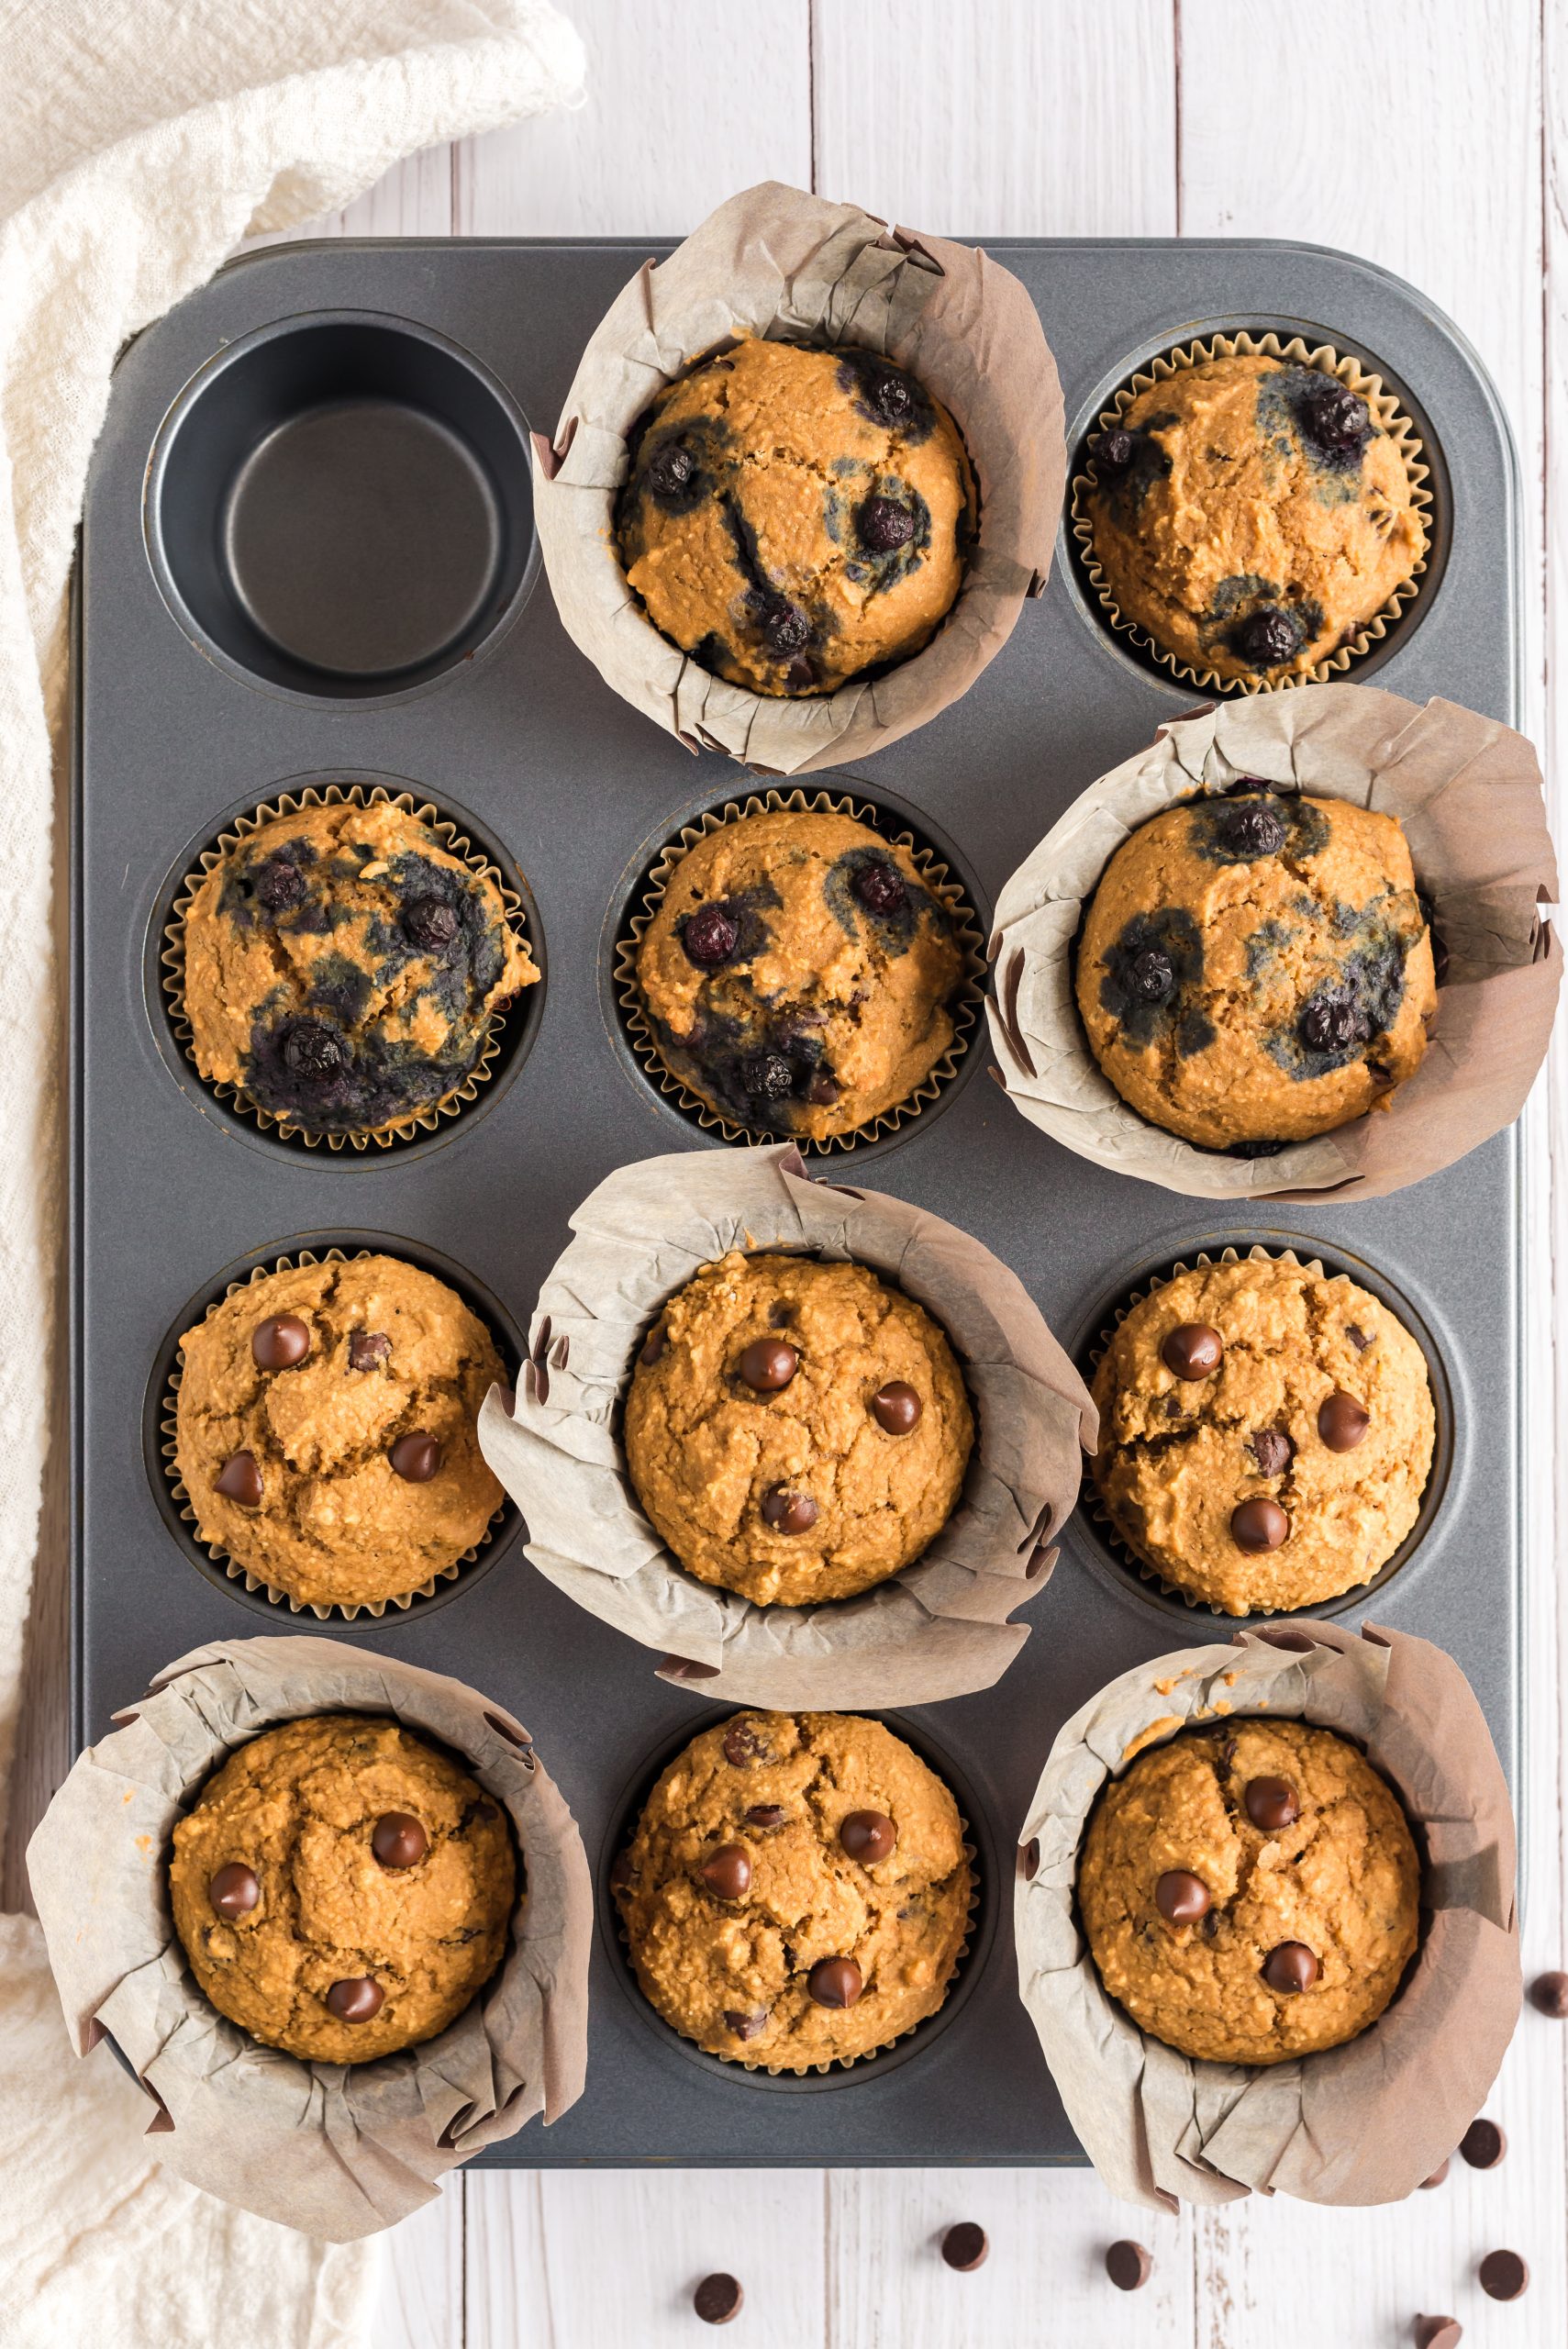 muffins (some with blueberries) in baking pan